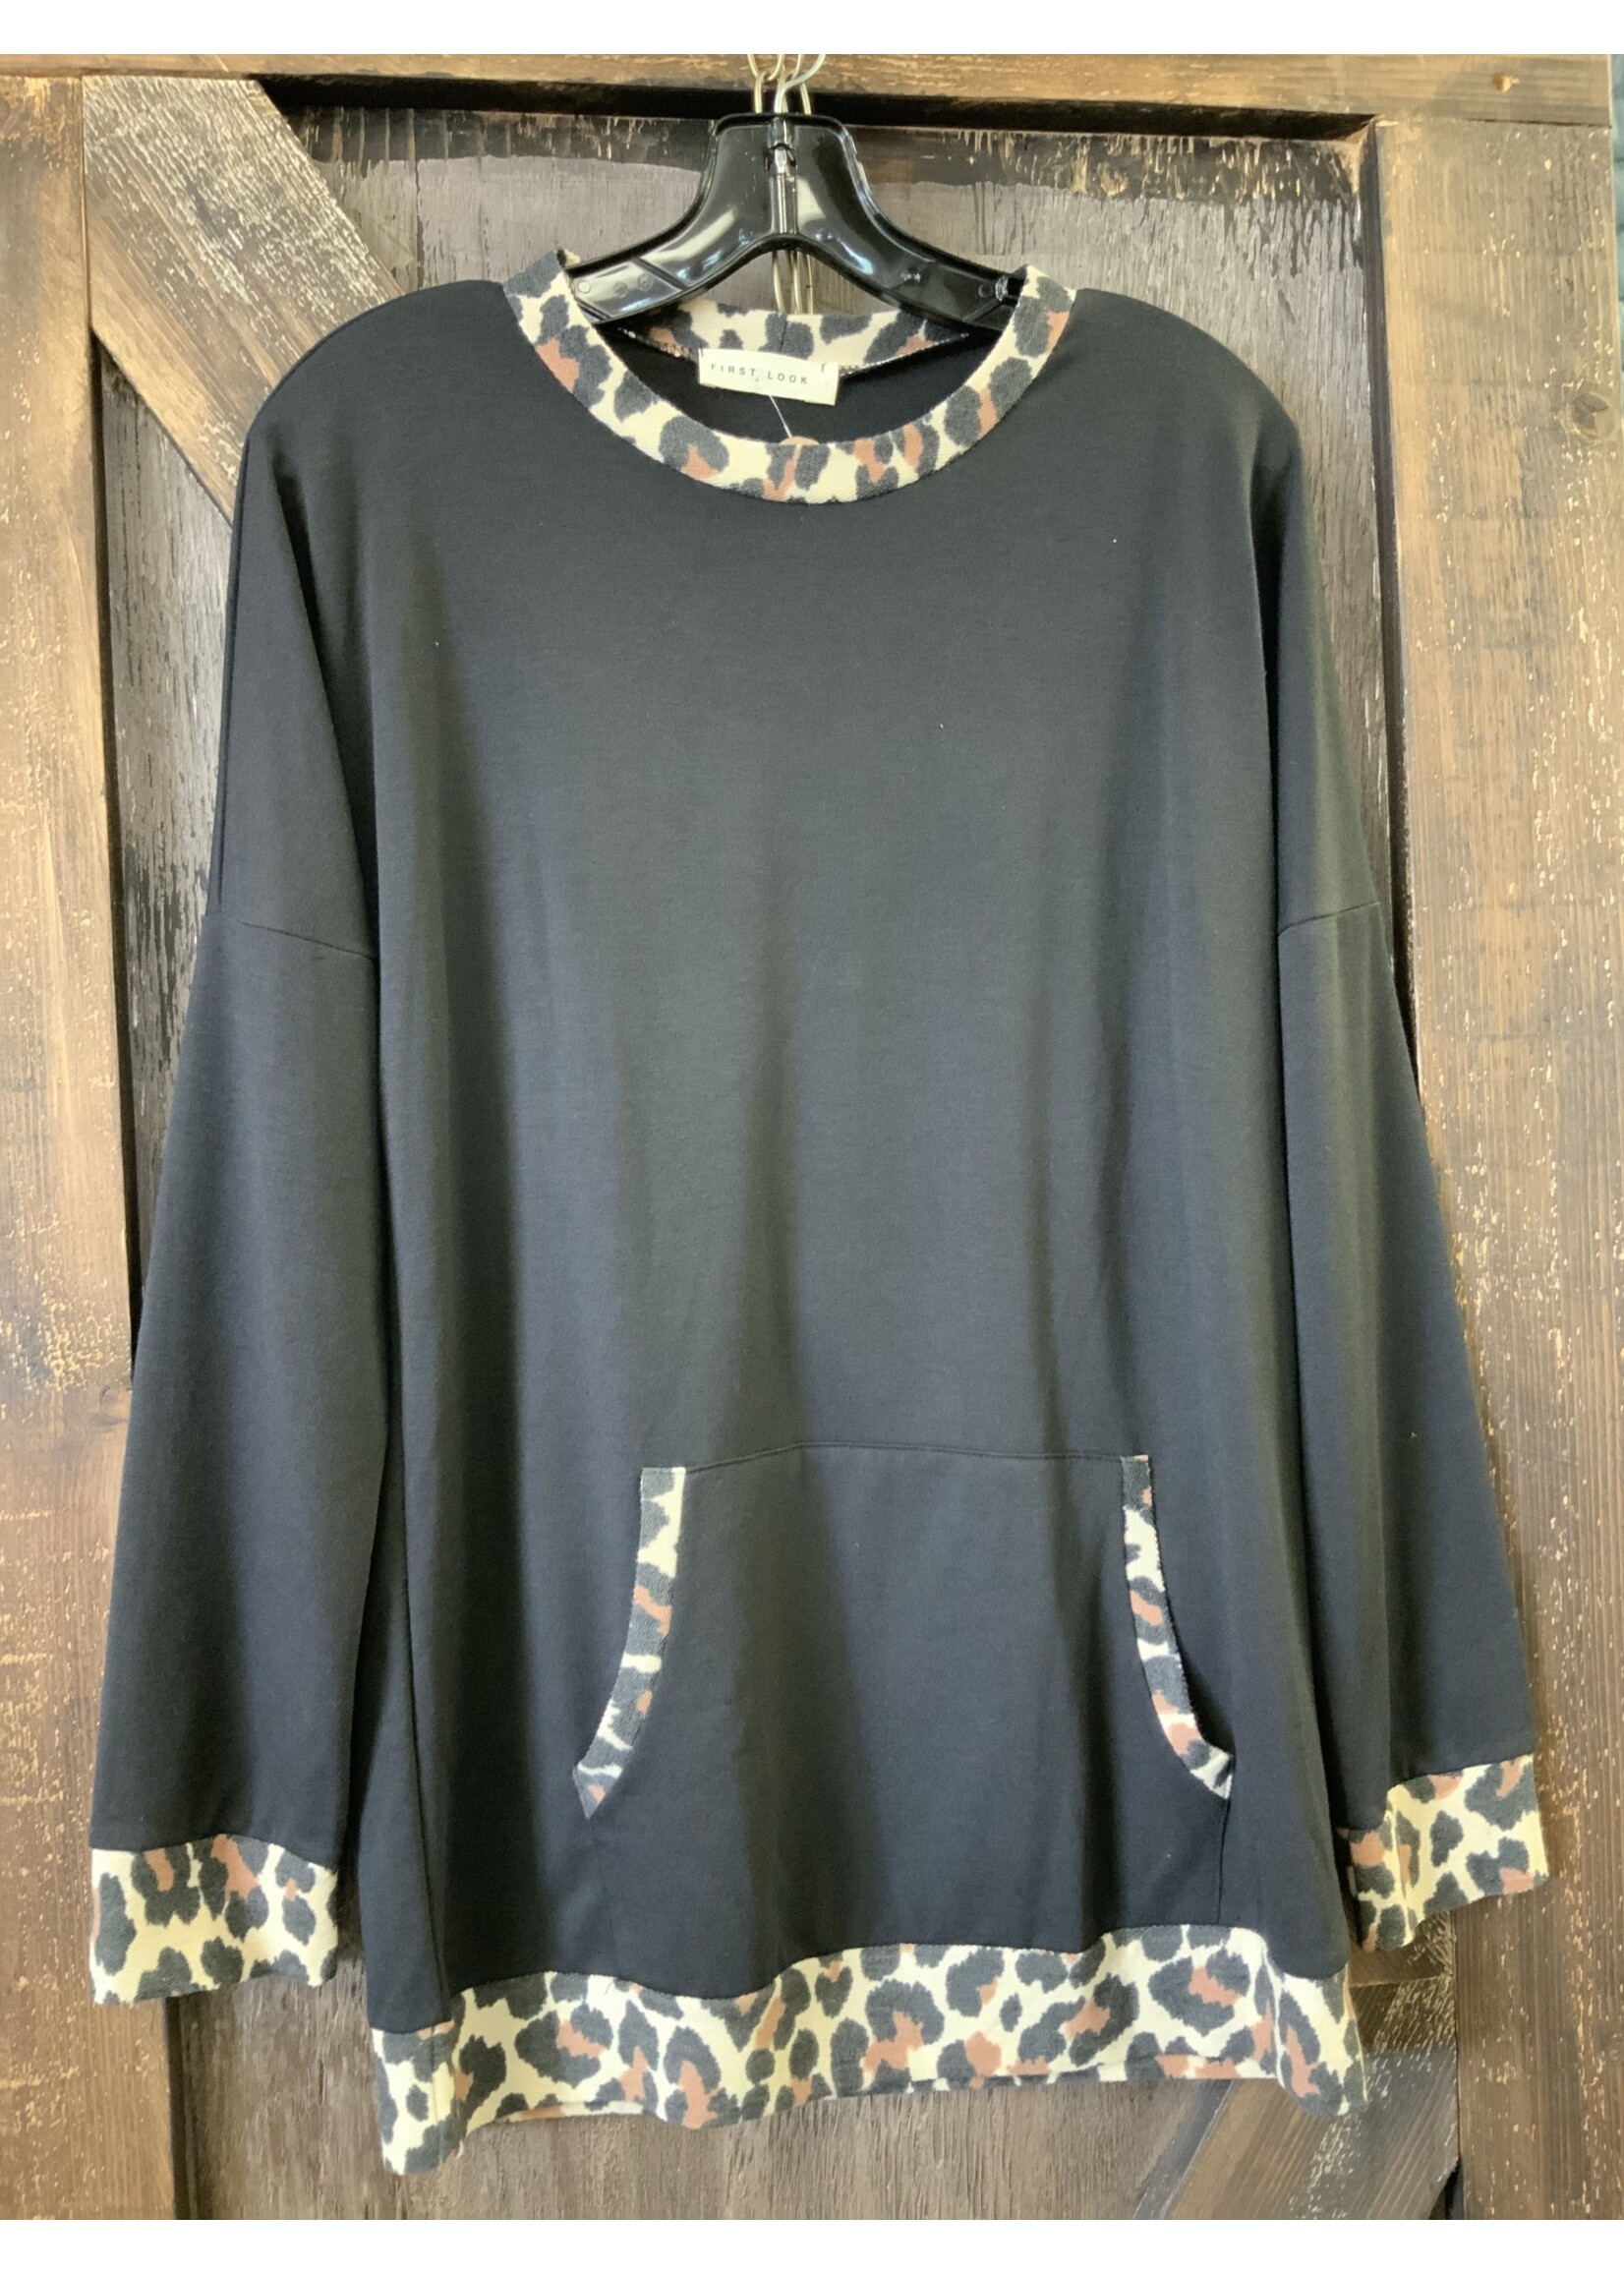 First Look WOMEN’S L/S ANIMAL PRINT BLACK W/POCKETS TOP Med